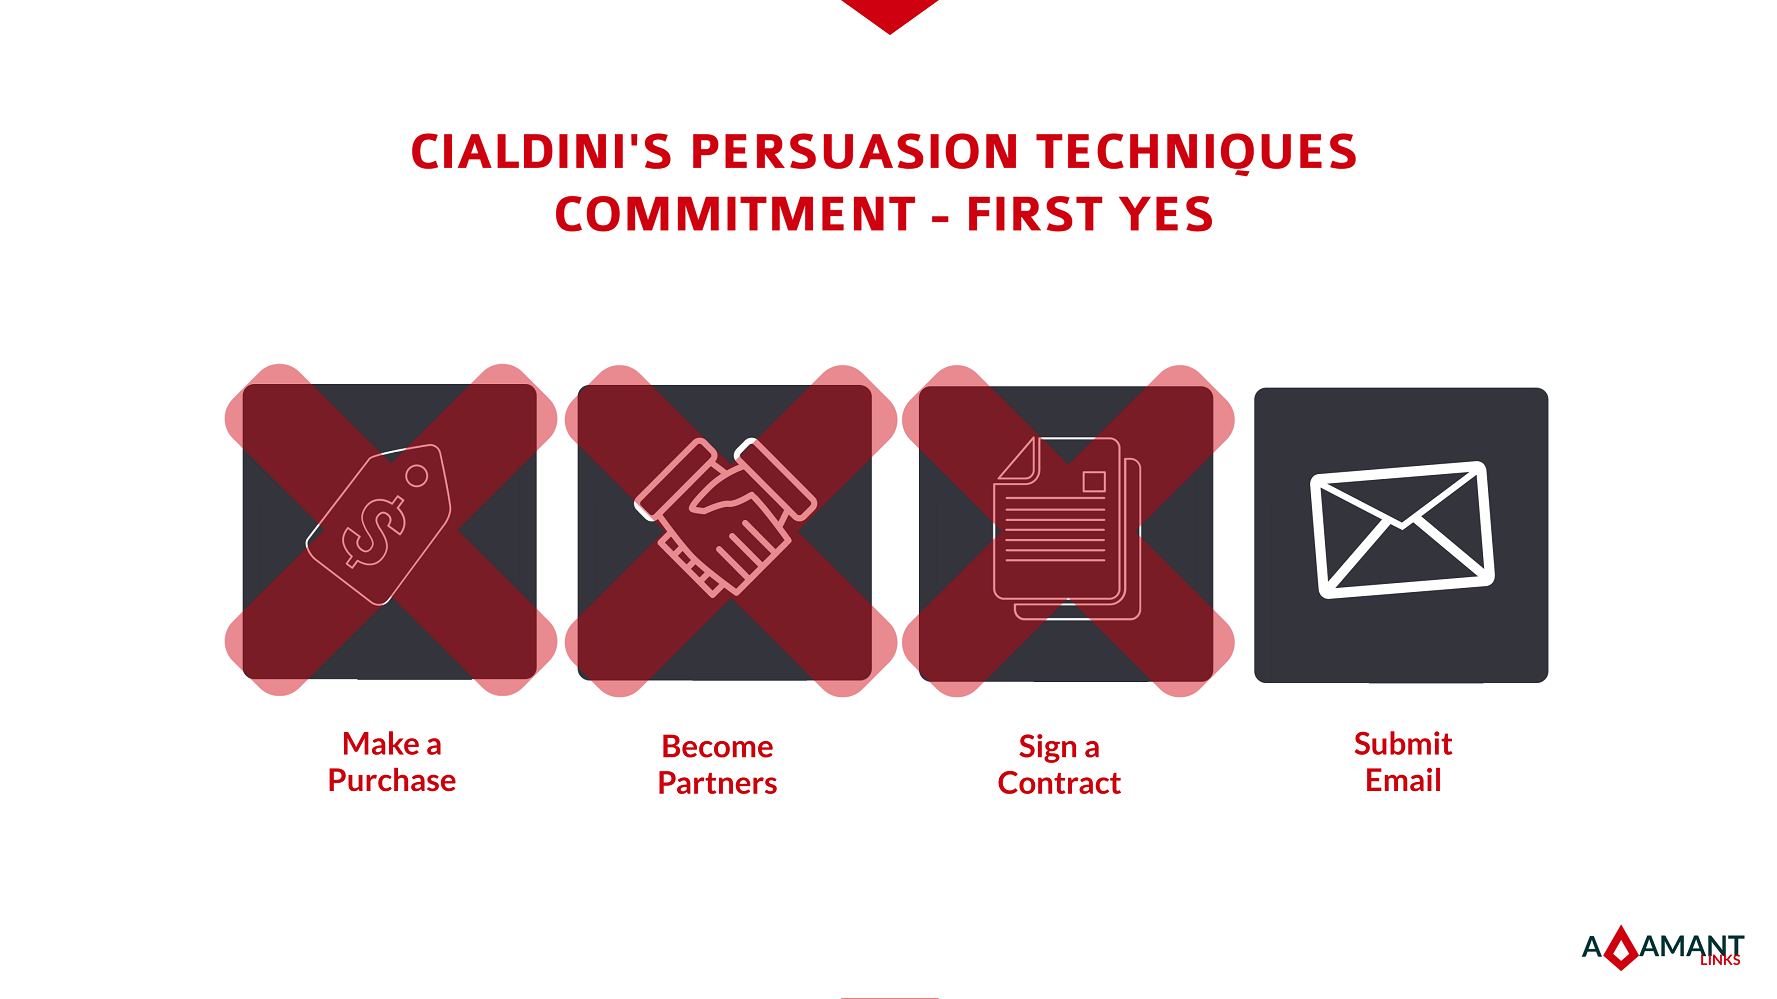 Adamant Links - Cialdini's Persuasion Techniques - Commitment: First Yes